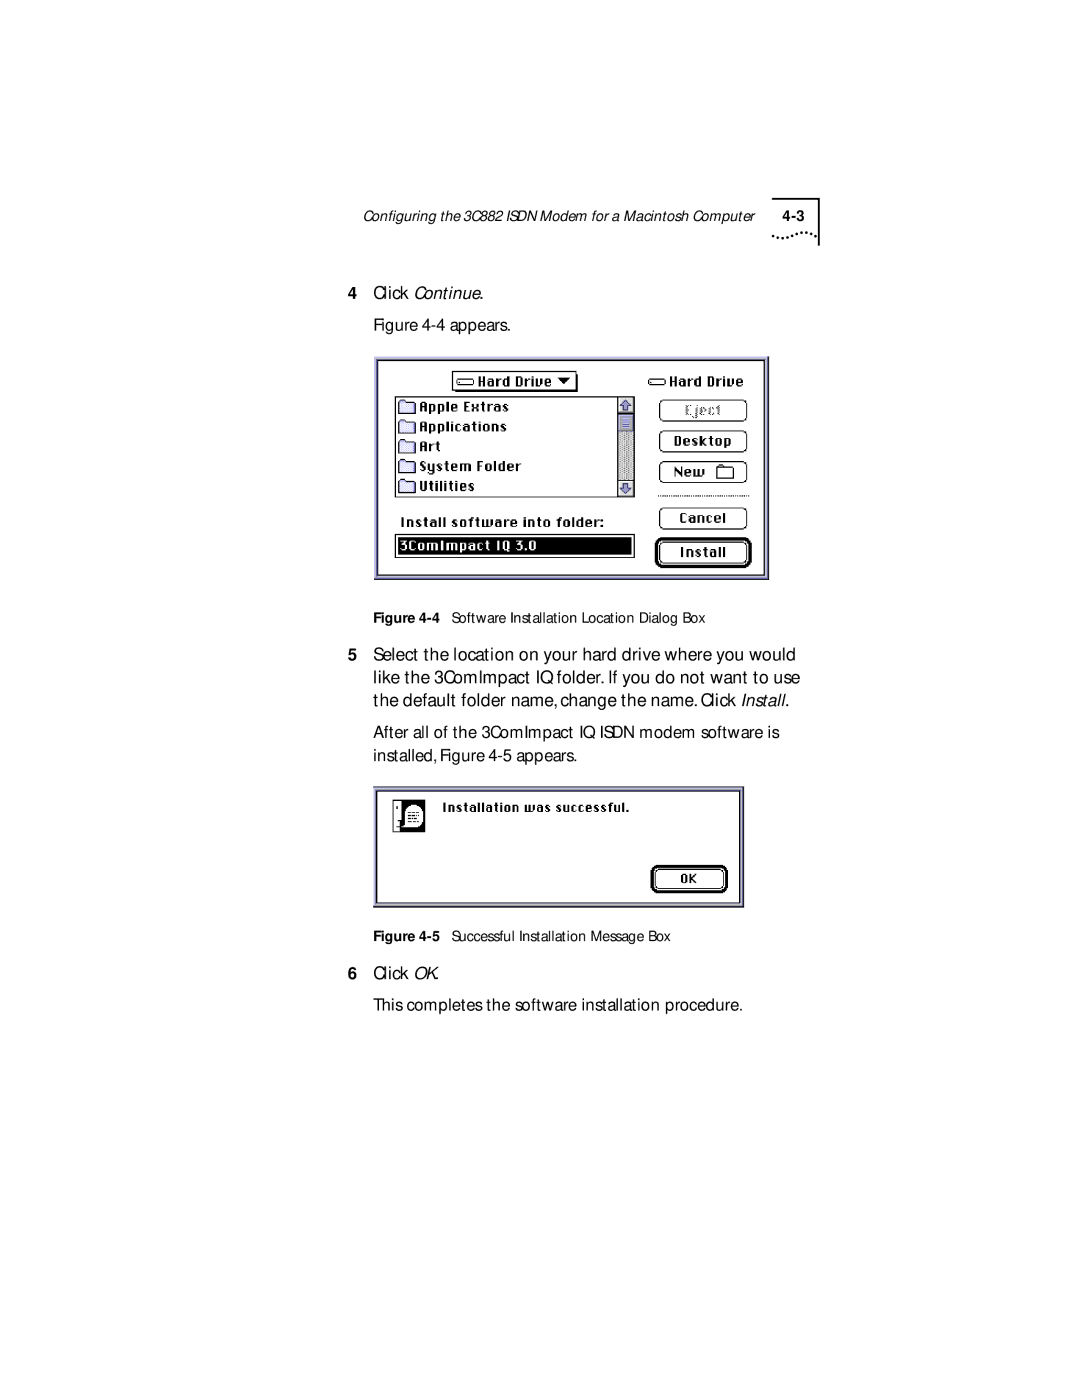 3Com 3C882 manual Click OK This completes the software installation procedure, Click Continue. -4 appears 